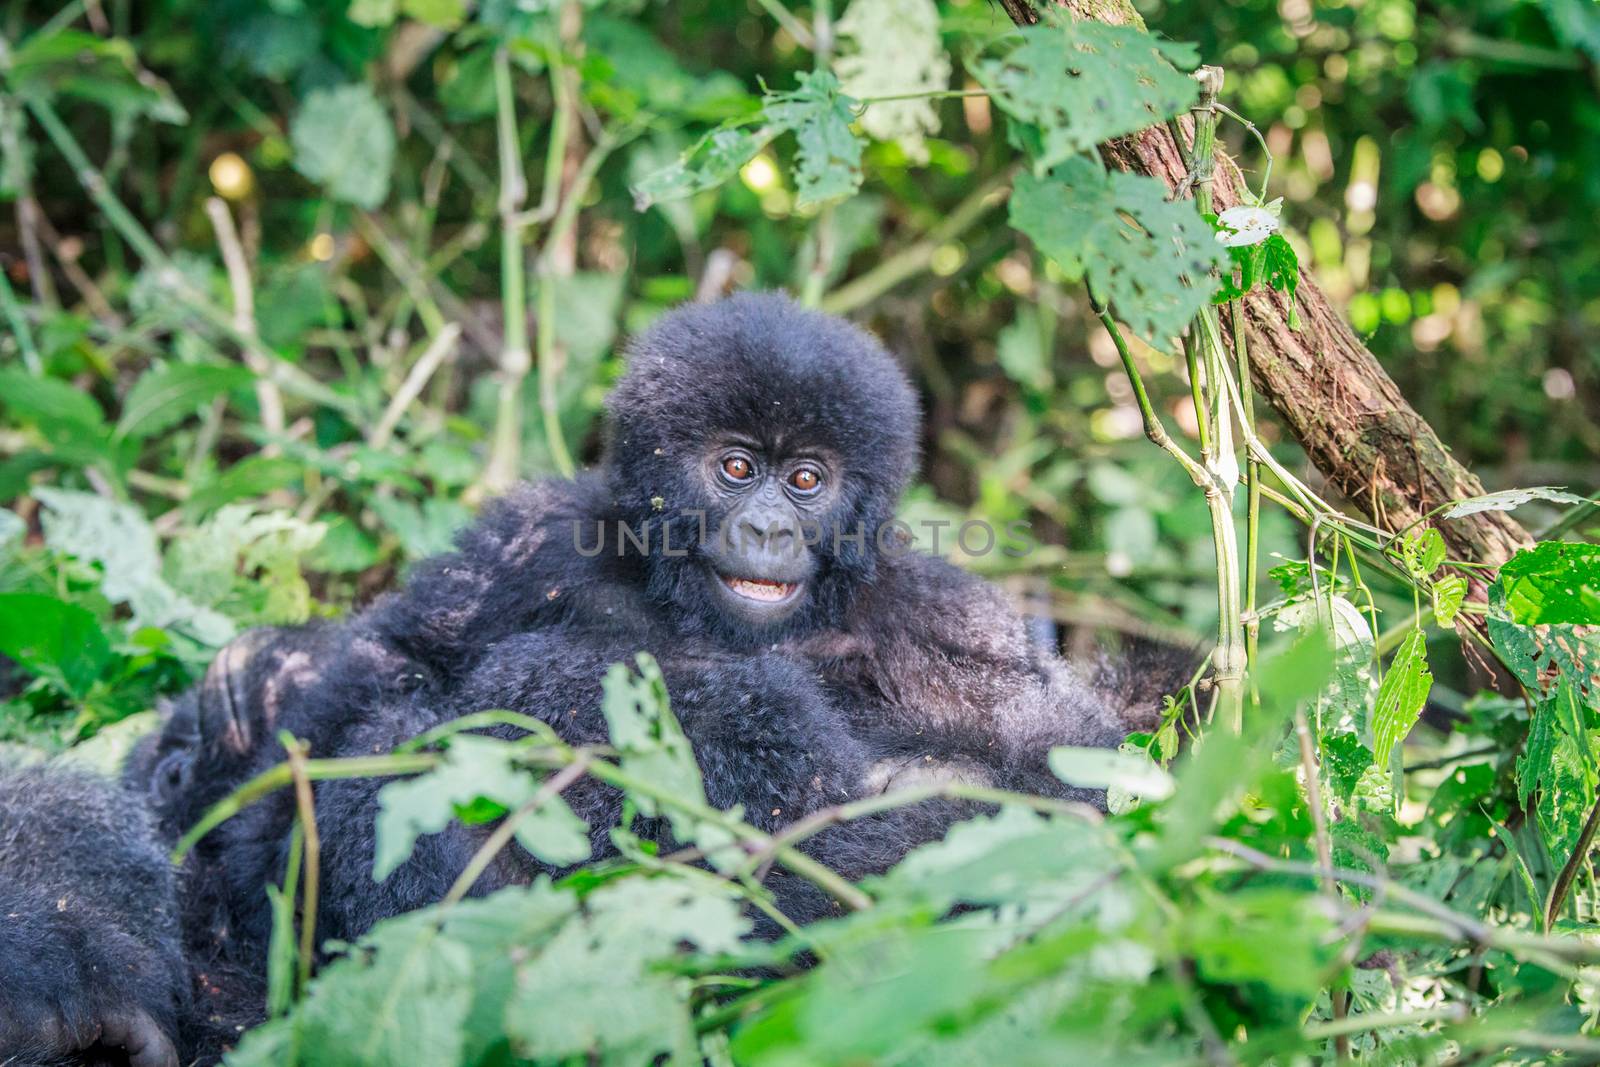 Baby Mountain gorilla sitting in leaves in the Virunga National Park, Democratic Republic Of Congo.